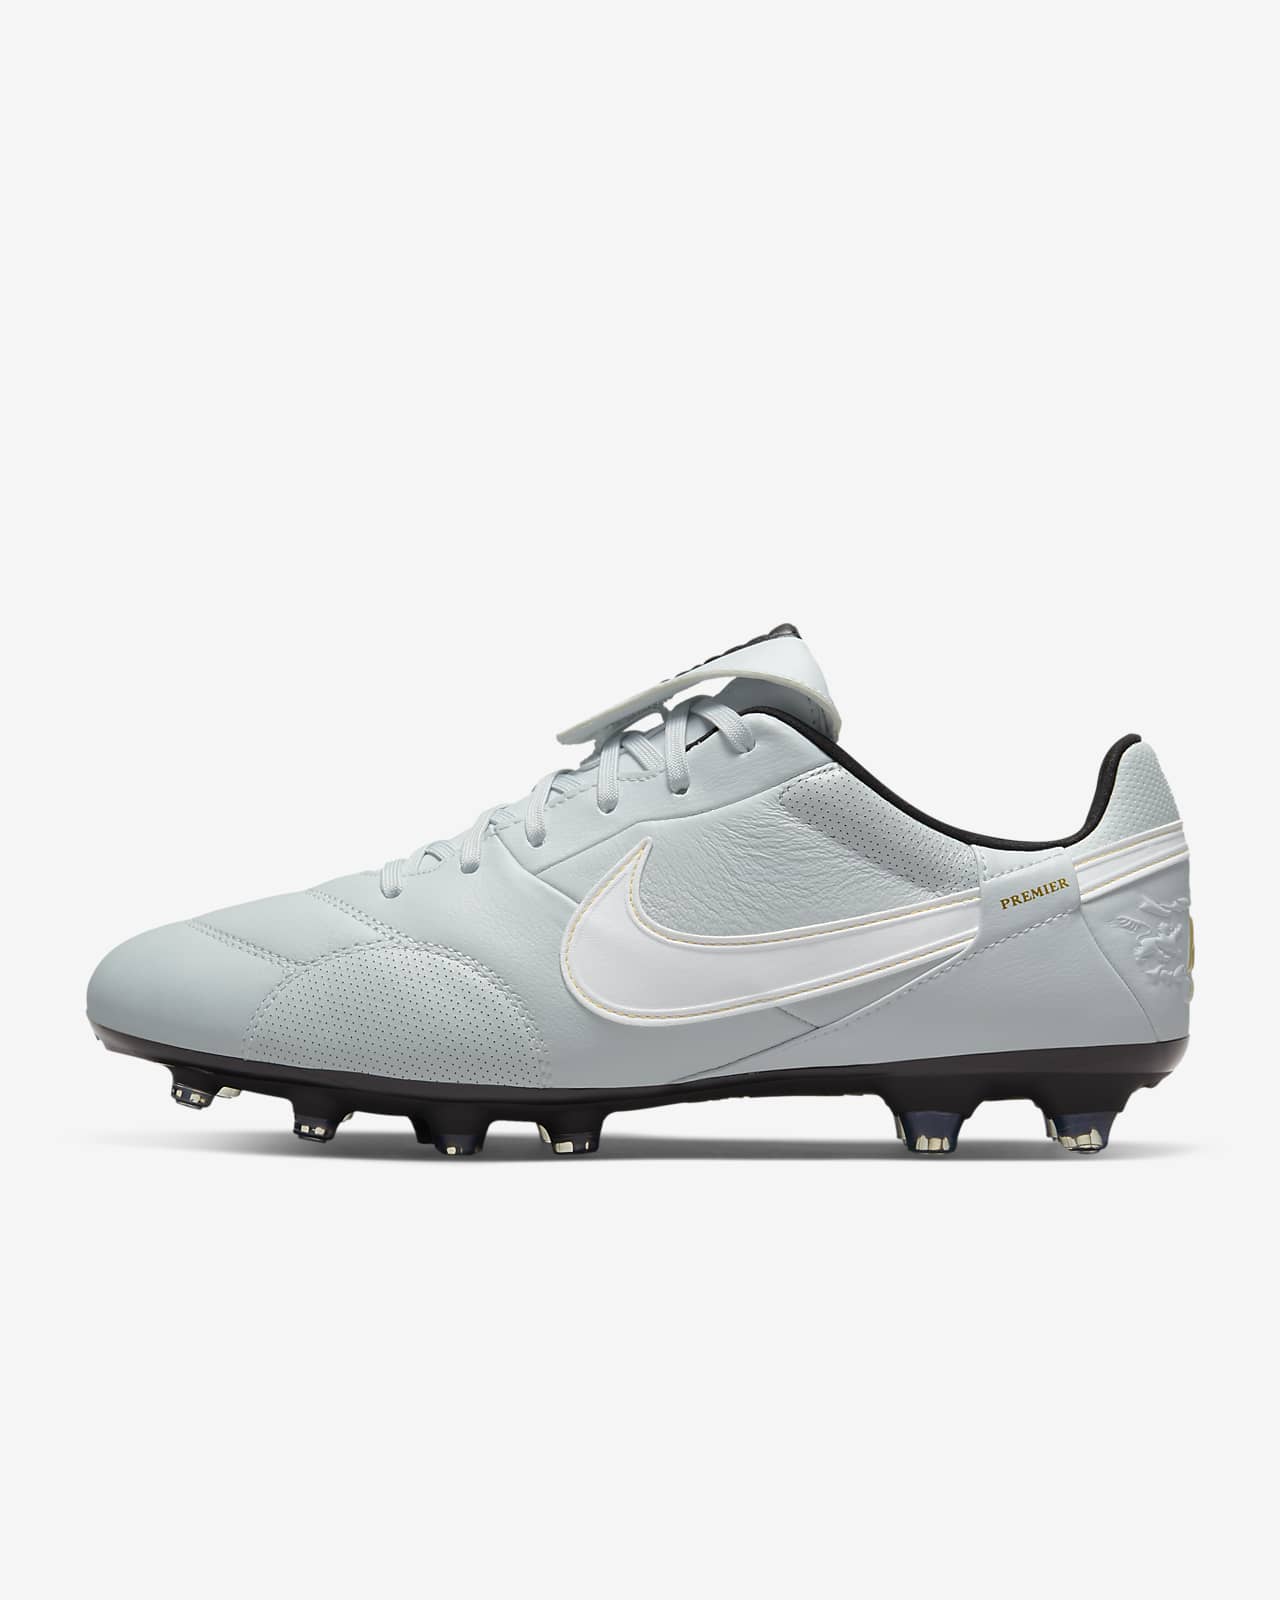 The Nike Premier 3 FG Firm-Ground Soccer Cleats